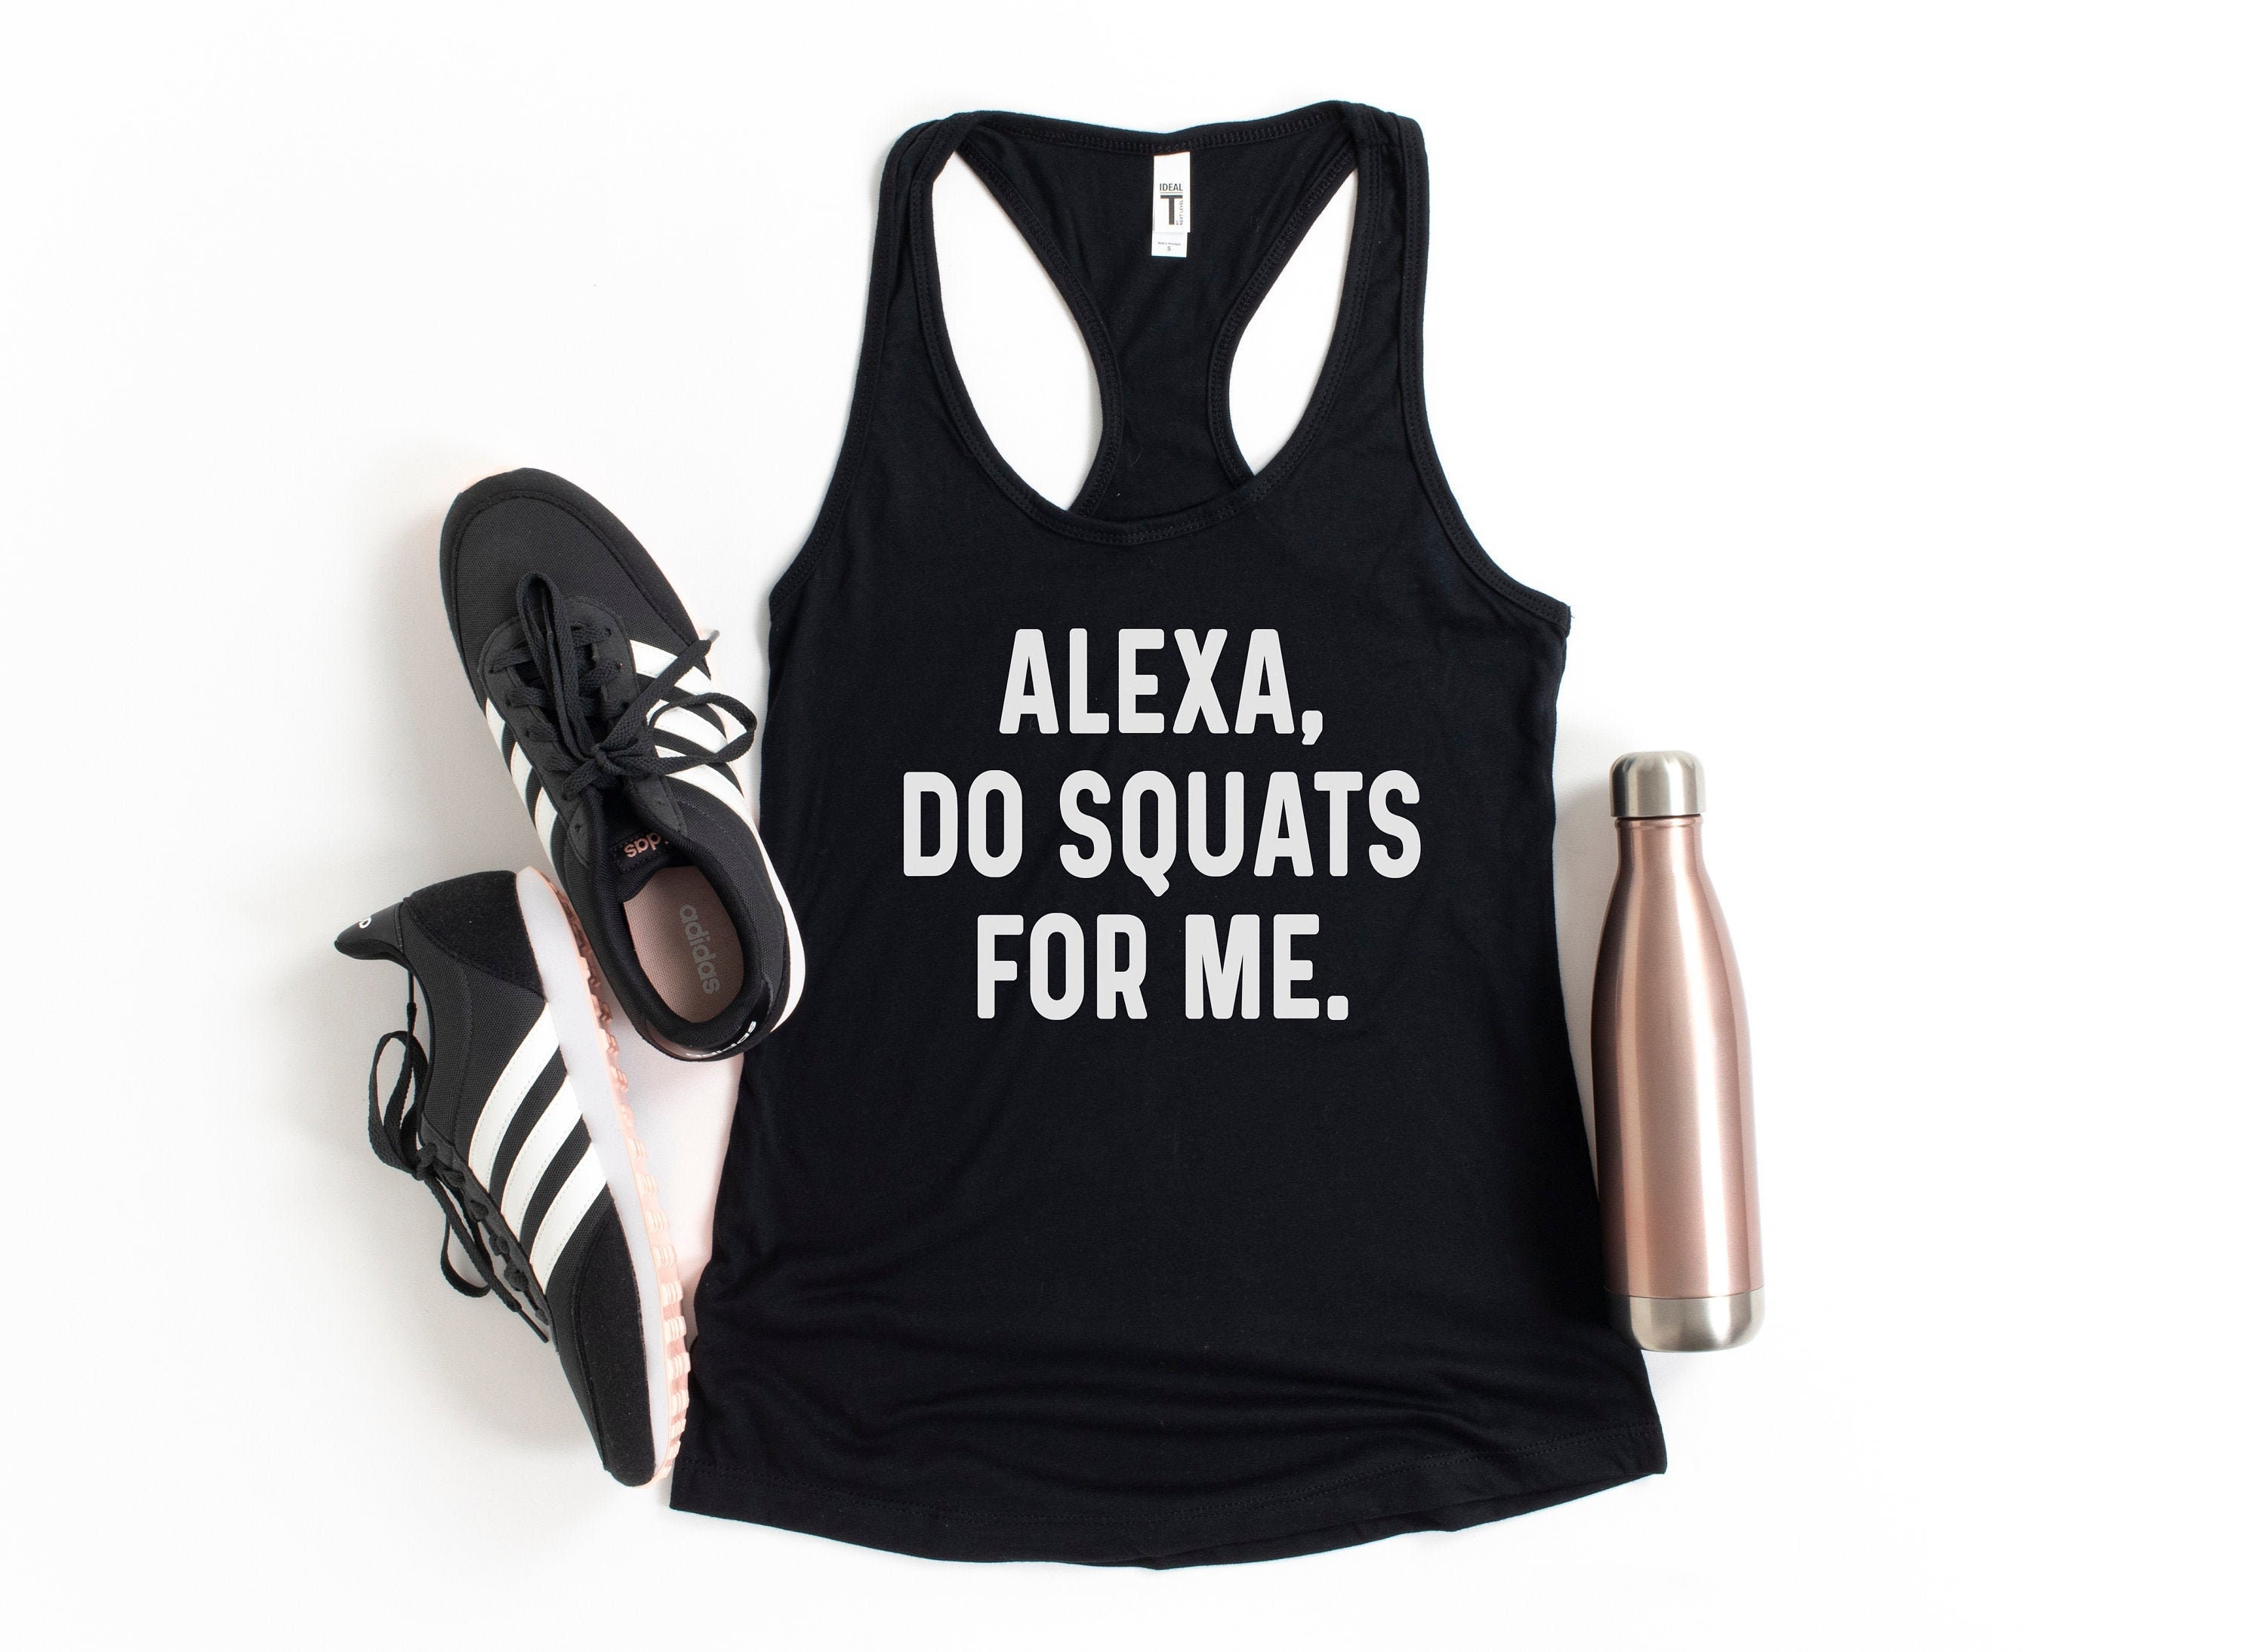 Funny Workout Tank for Women, Funny Workout Tank Top, Funny Gym Tank,  Workout Shirt Women, Workout Tops, Fitness Tank, Womens Workout Tanks -   Canada